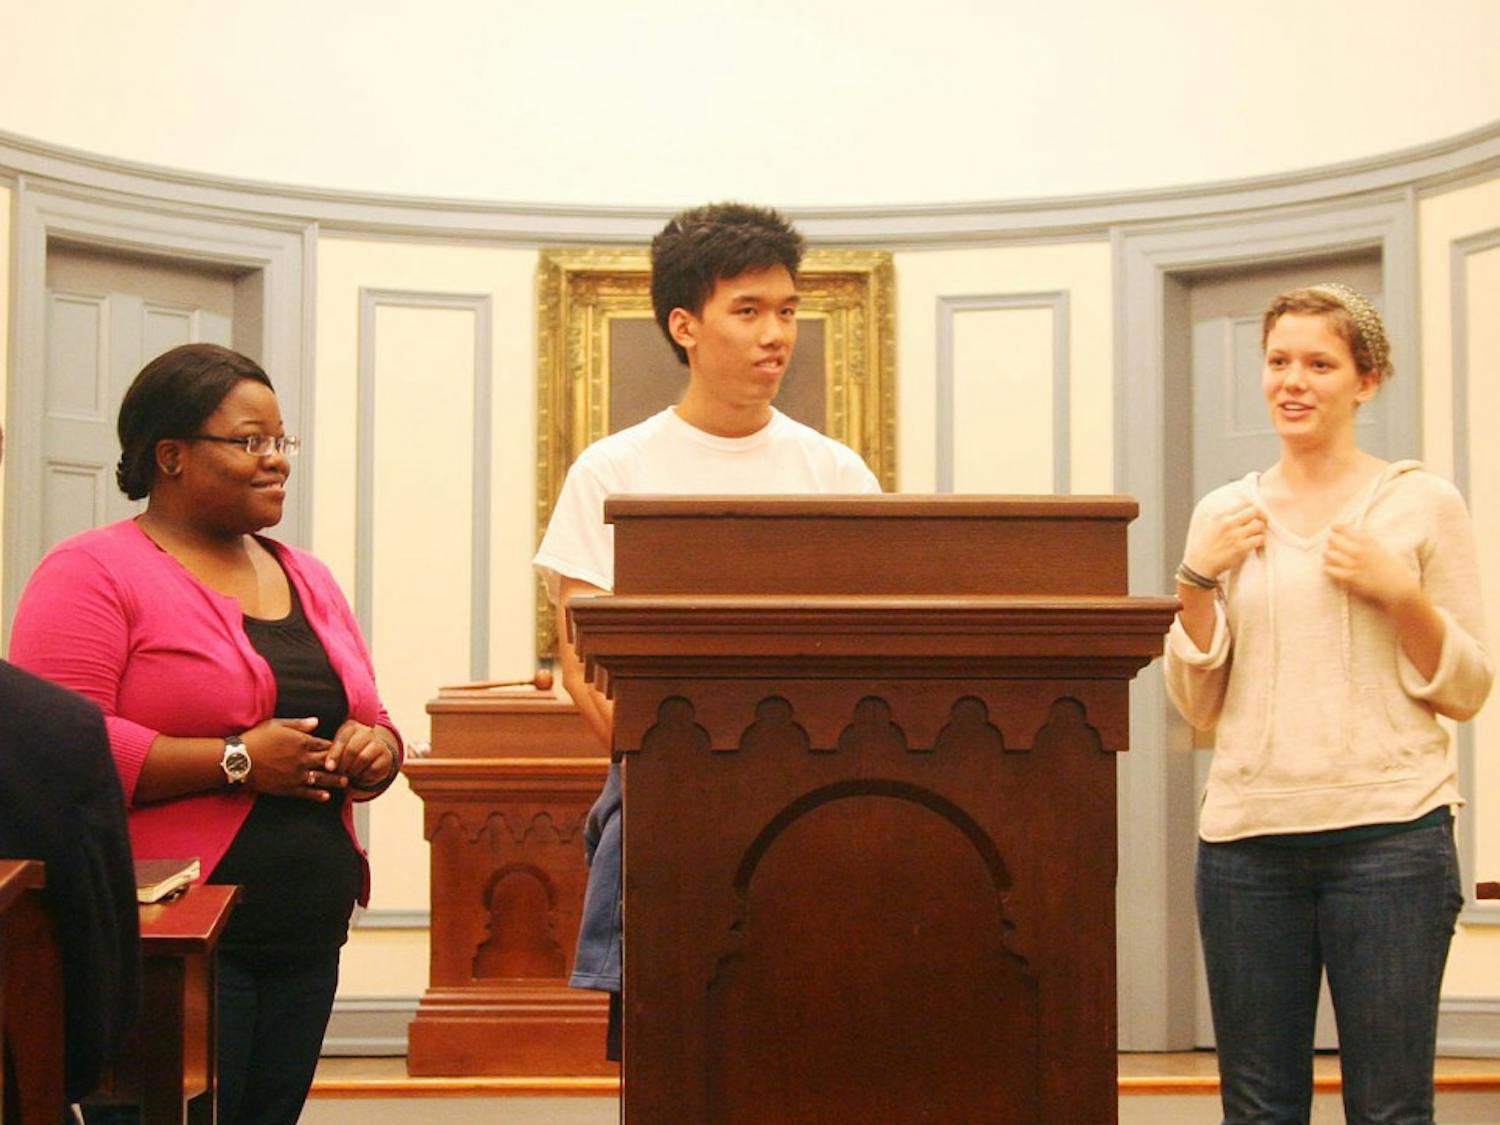 Di-Phi debate on panhandling and homelessness in Chapel Hill. 3 candidates for Chapel Hill town council were present and voiced their viewpoints.Members of  HOPE (Homeless Outreach Poverty Eradication) also were there and explained their work and efforts. Pictured from left to right are: HOPE chairs: Joyelle Gordon (senior sociology major), Kevin Ji (junior public policy and math major), and Alex Biggers (junior public policy/econ major)